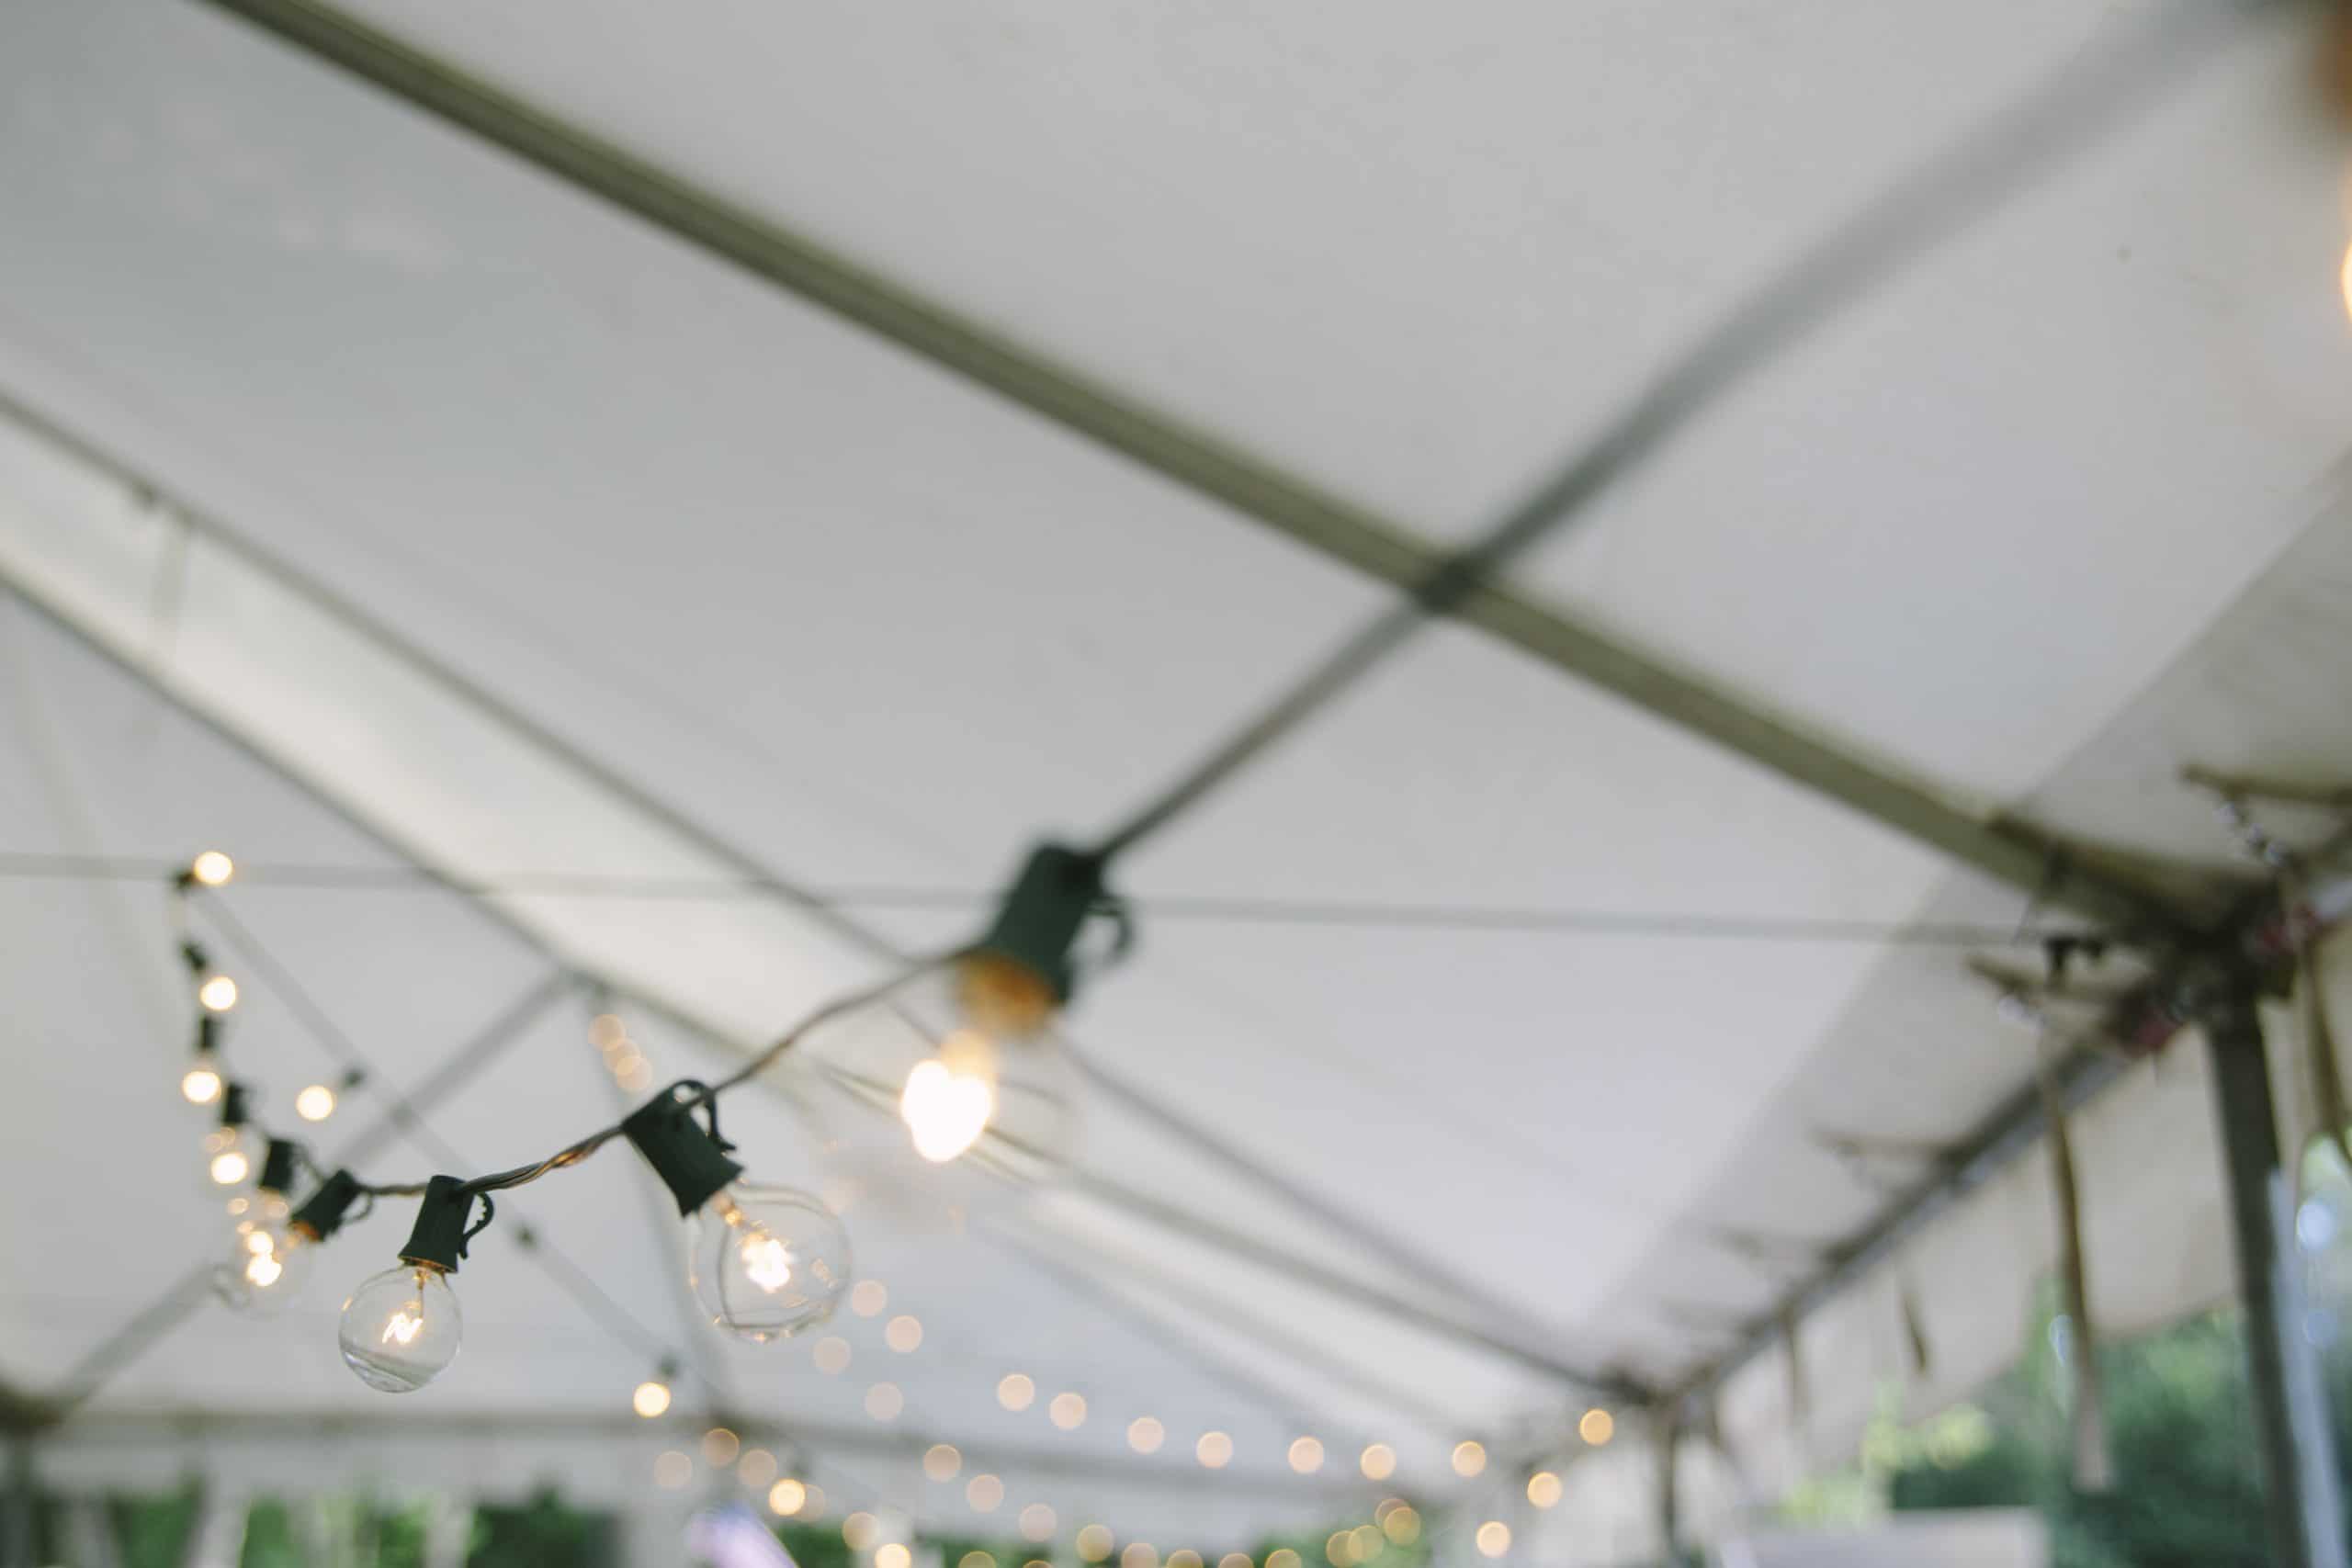 Lighting inside a tent for a pop-up event